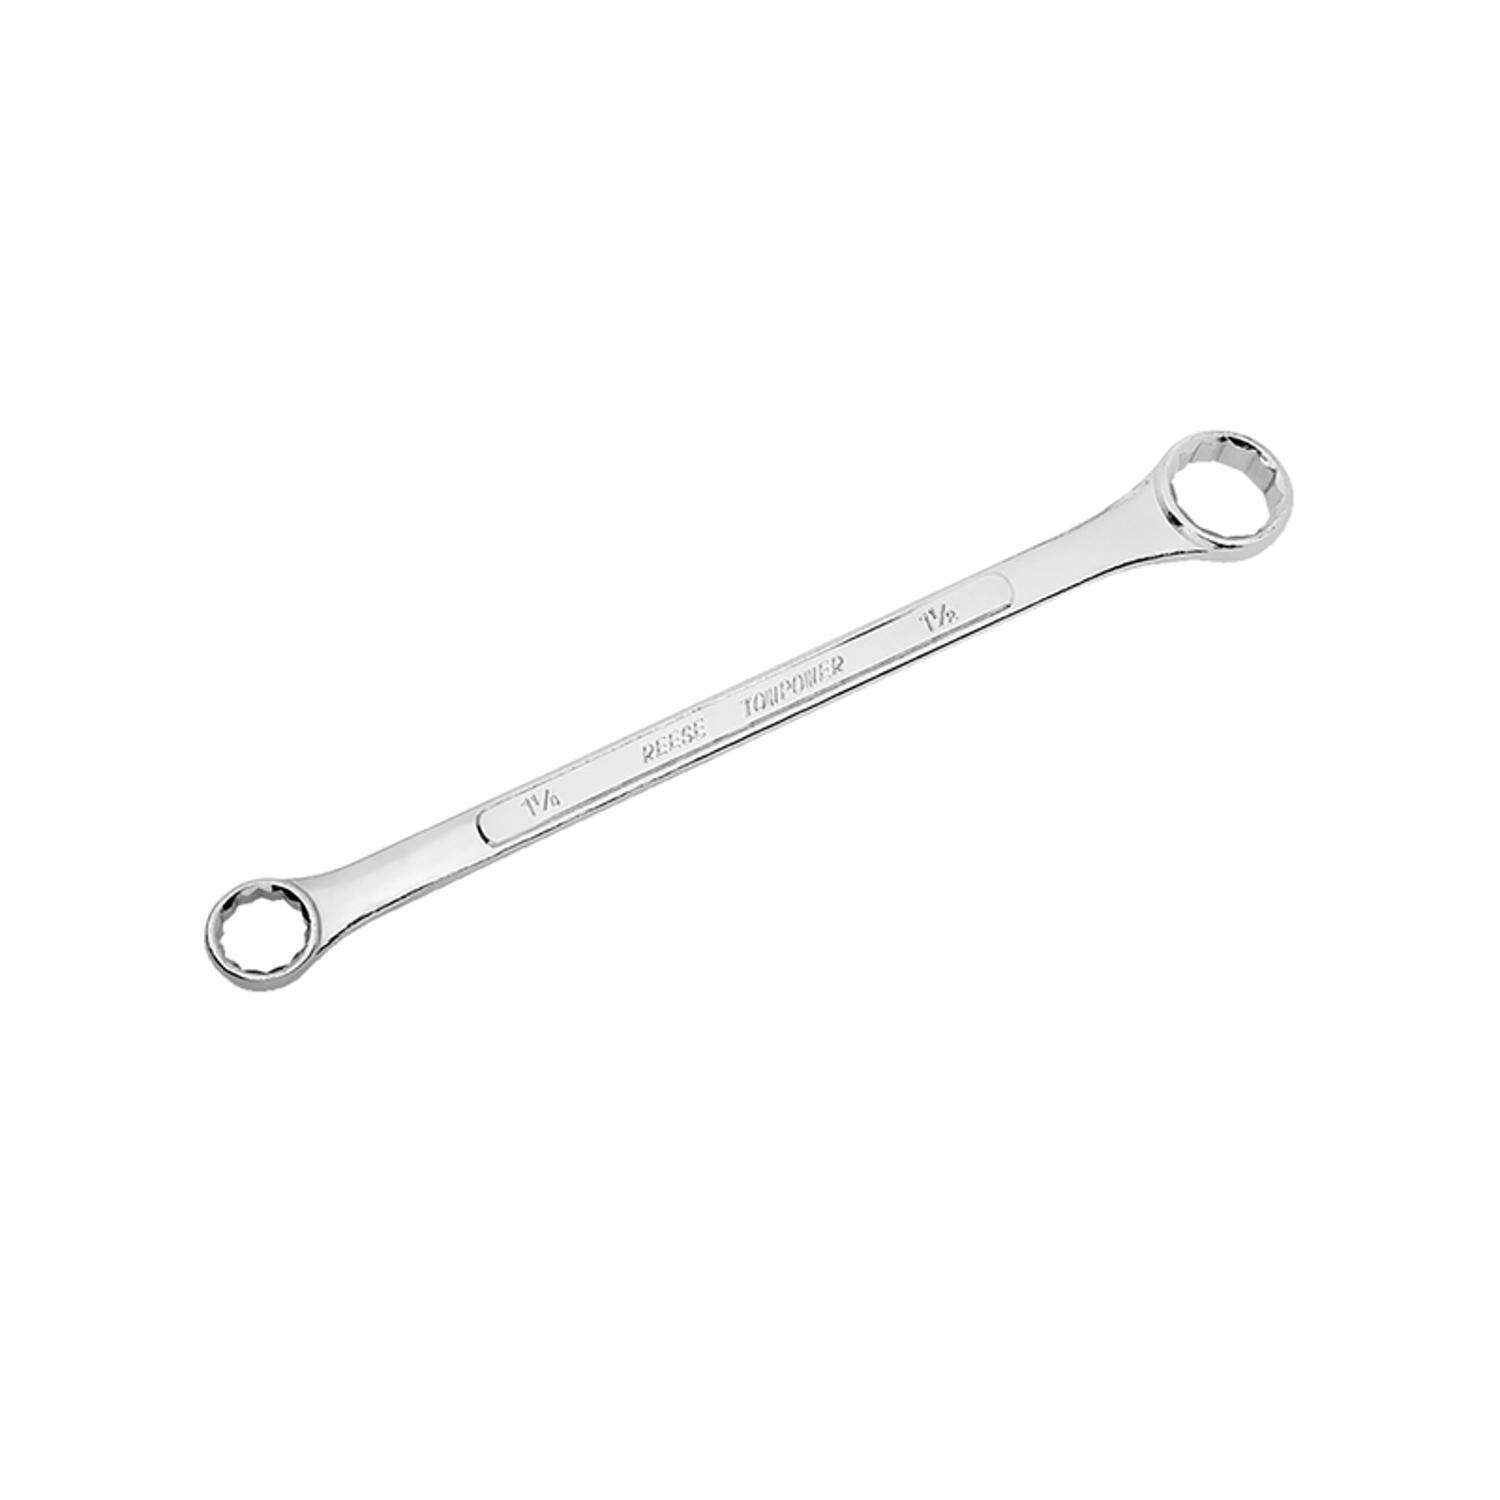 Reese Towpower 74342 Hitch Ball Wrench 